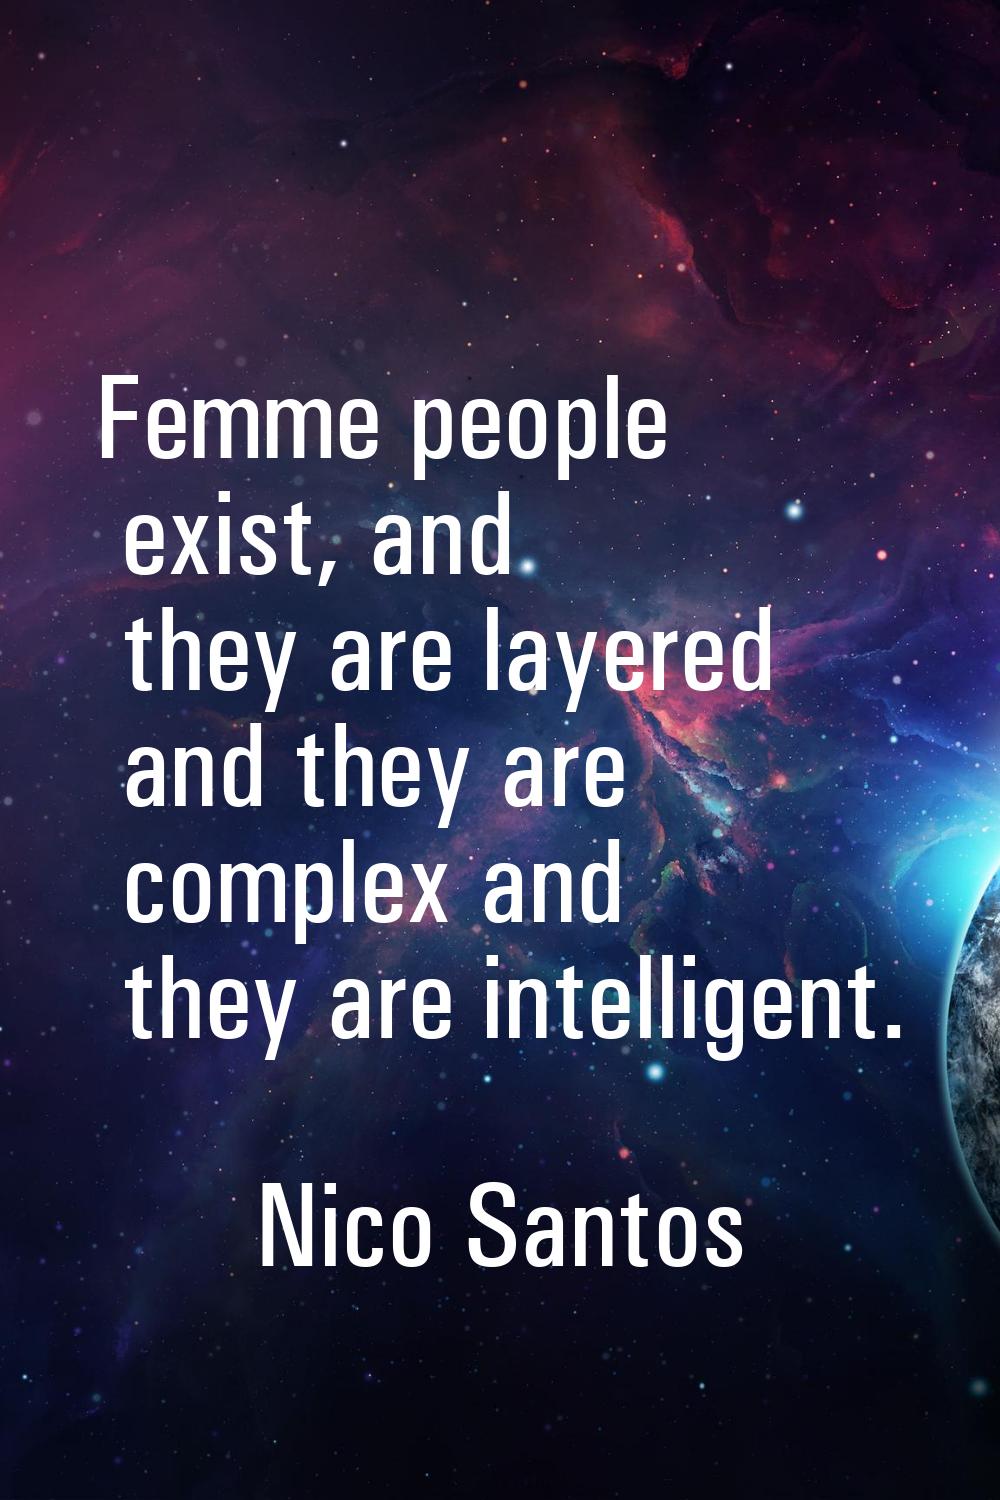 Femme people exist, and they are layered and they are complex and they are intelligent.